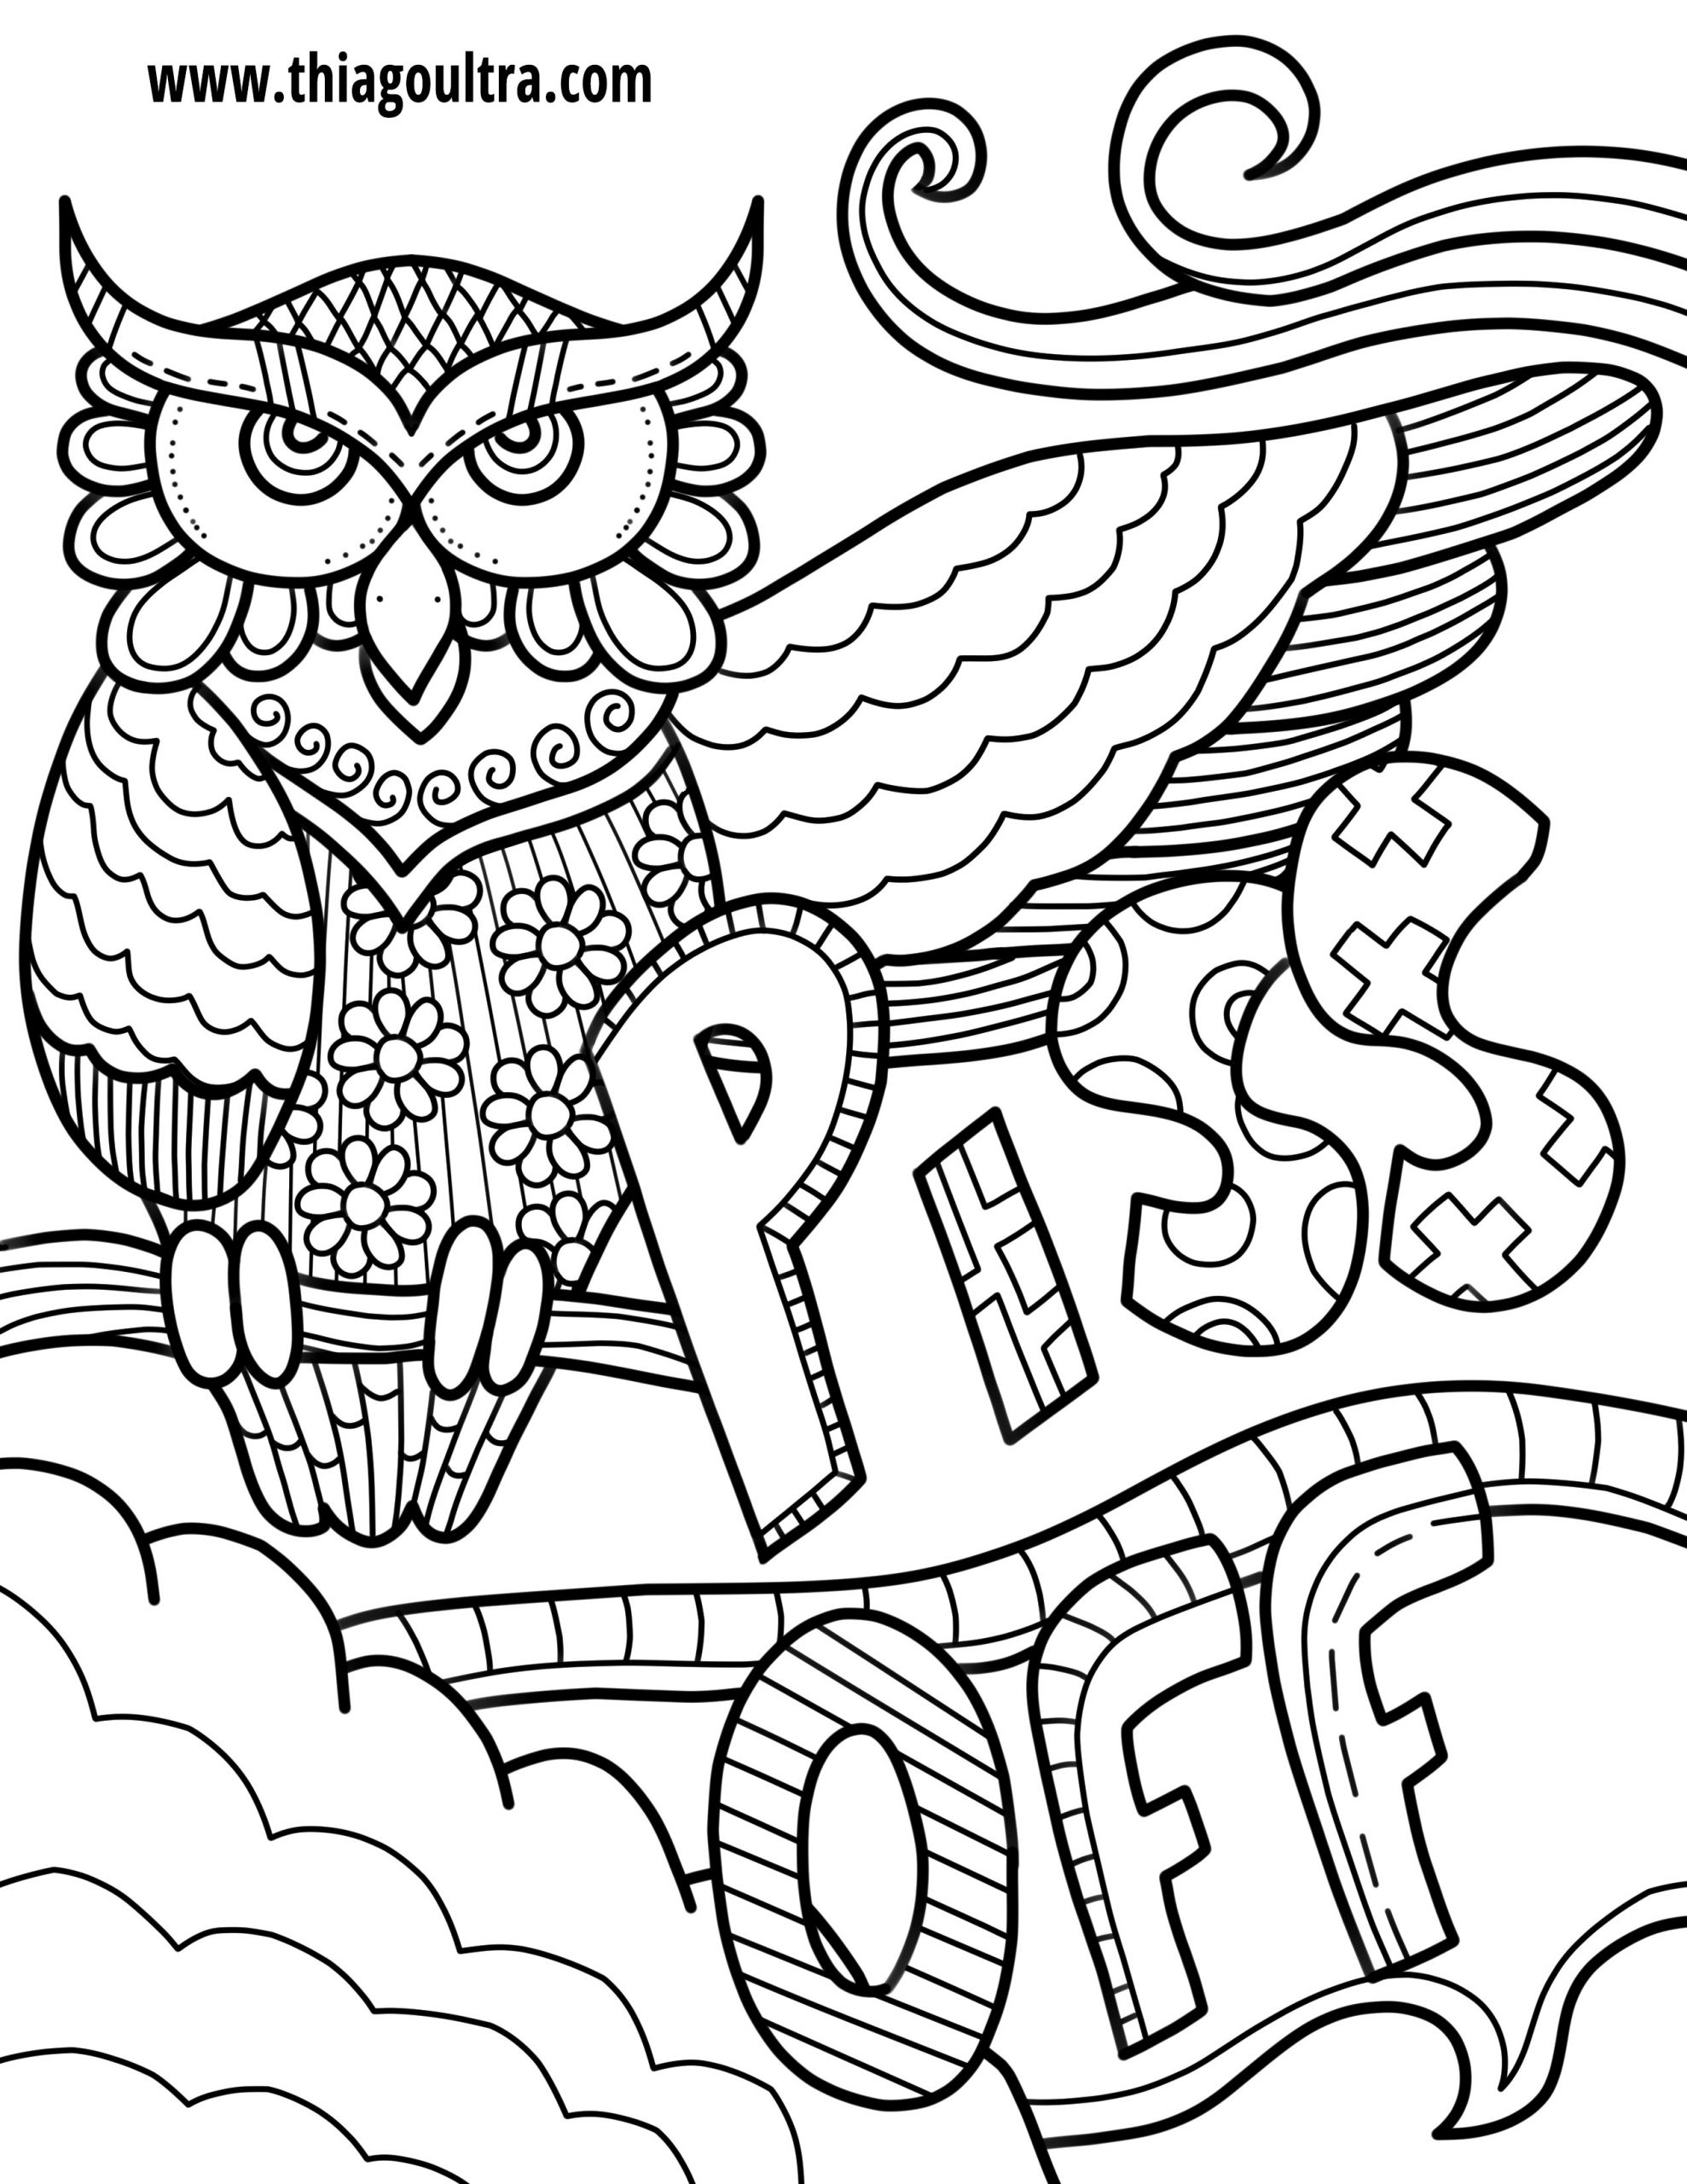 Adult Cursing Coloring Book
 Adult Swear Coloring Pages at GetDrawings